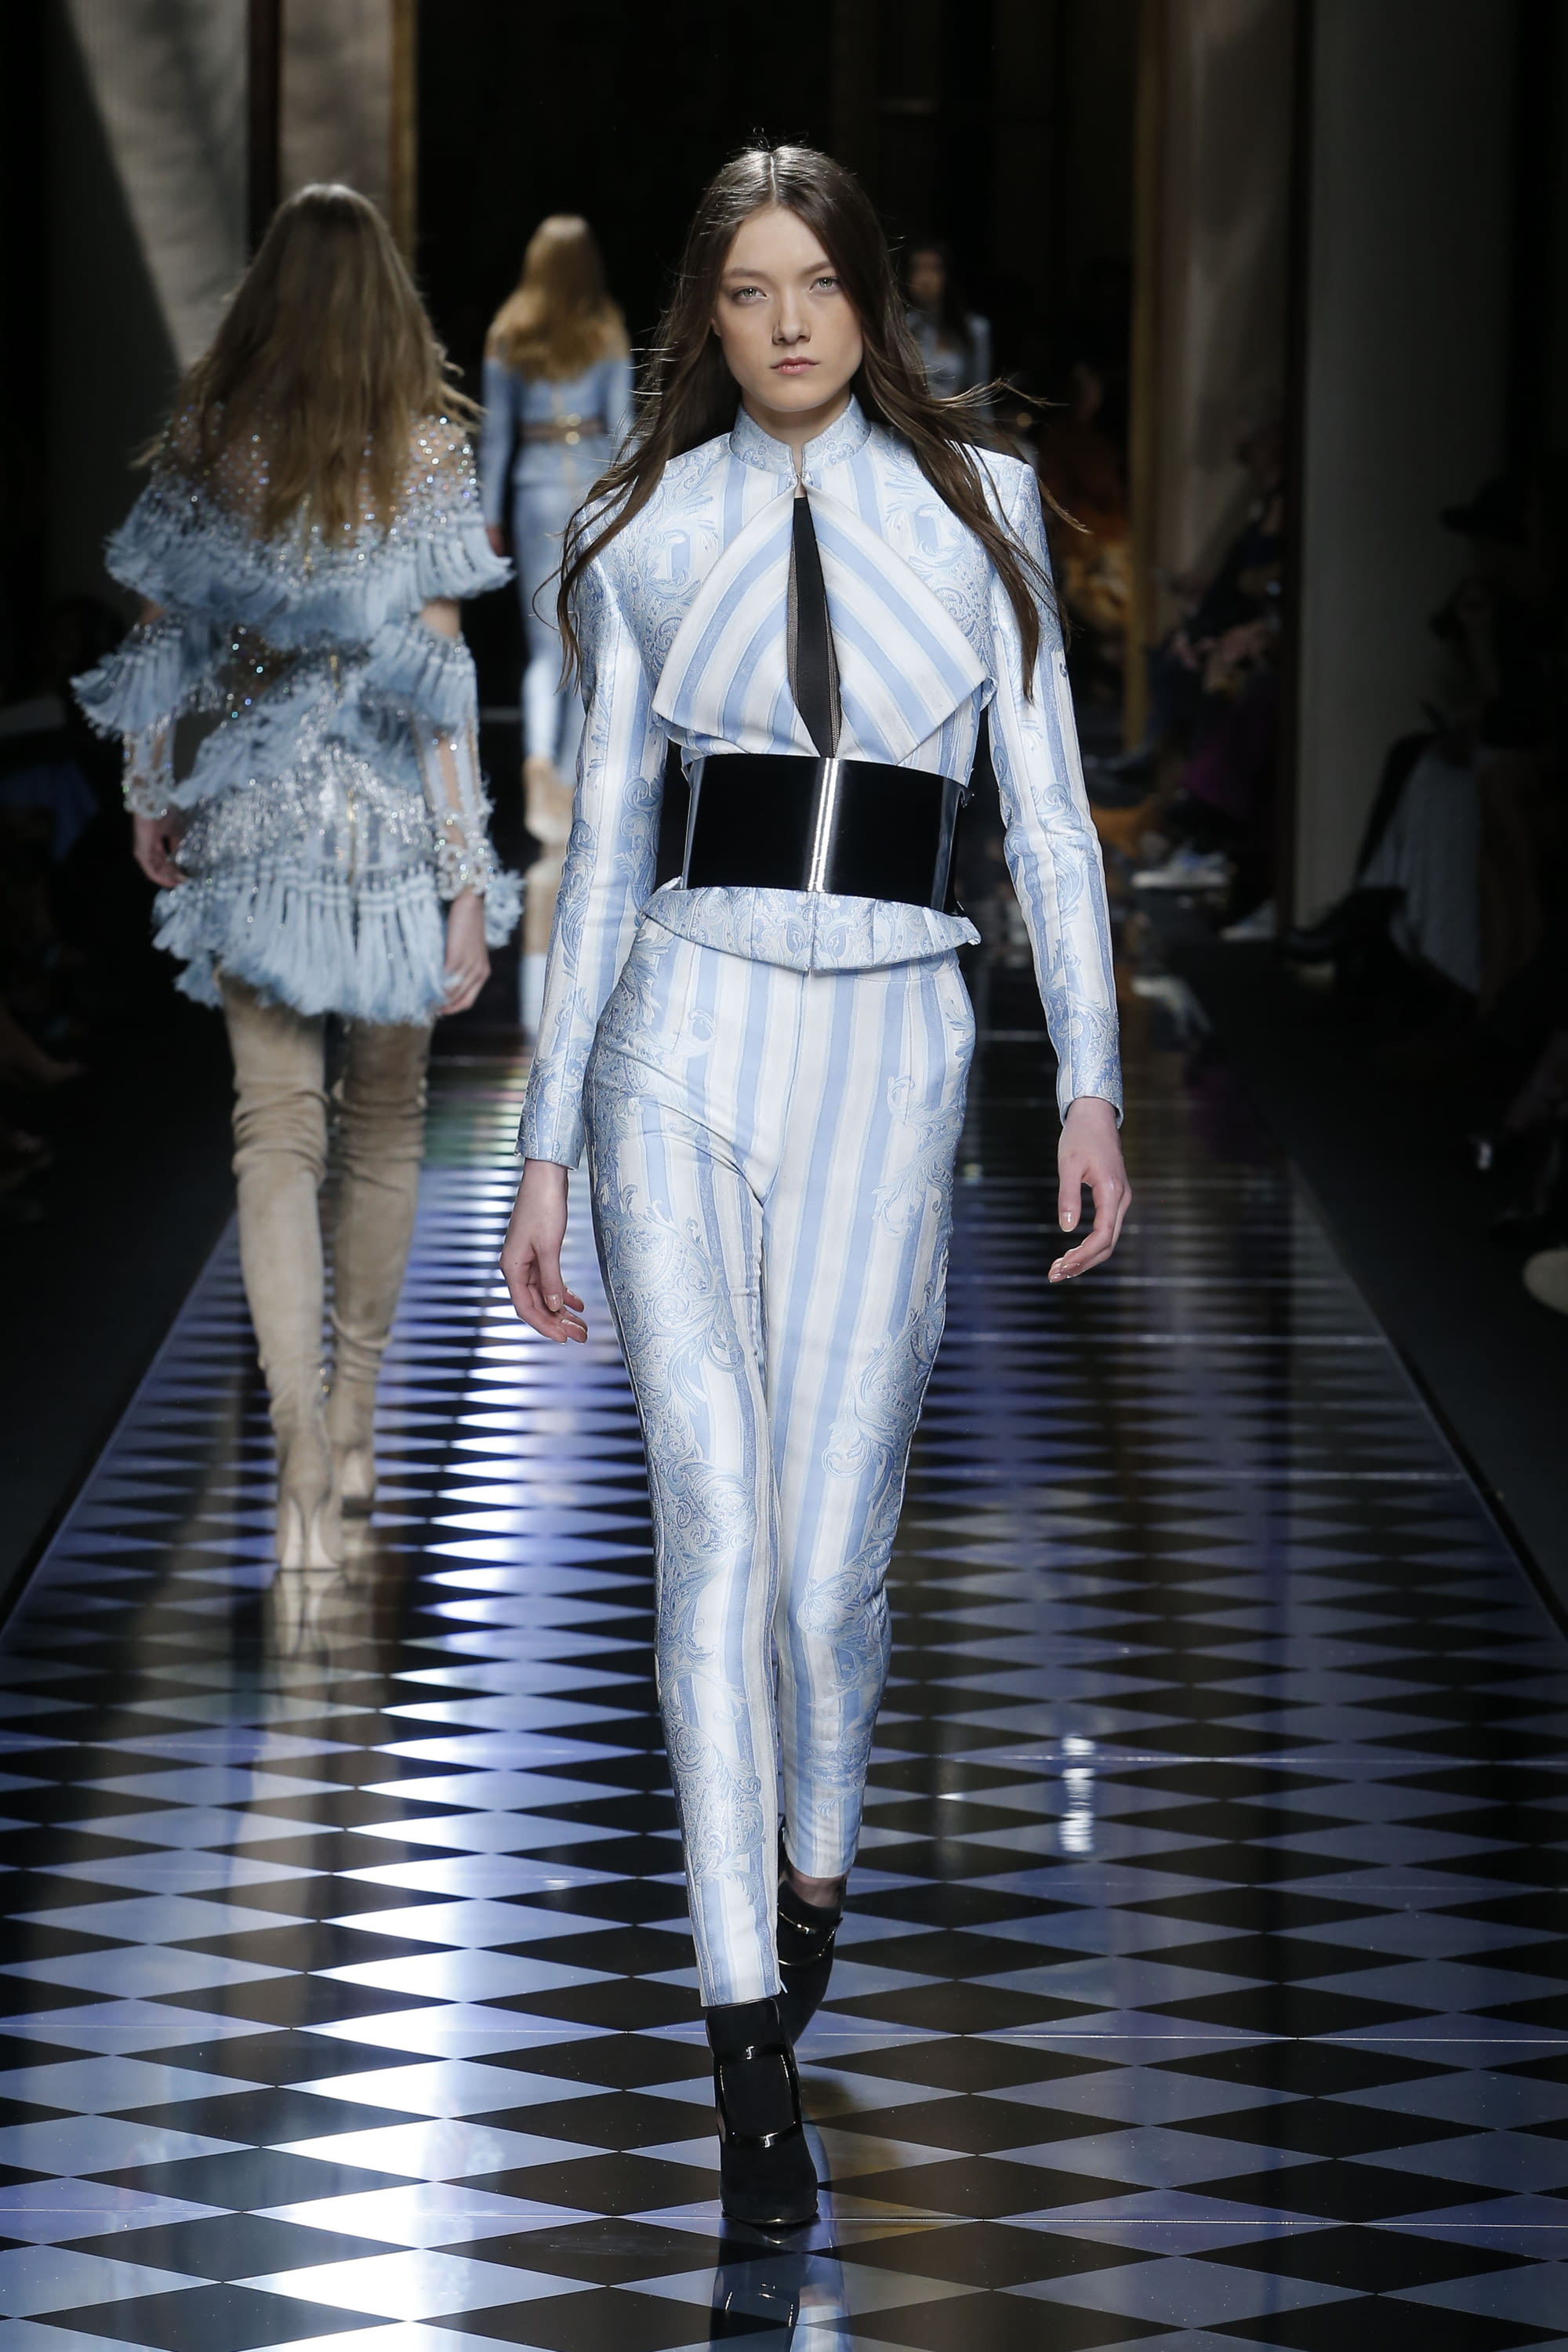 All the Looks From the Balmain Fall 2016 Ready-to-Wear Show